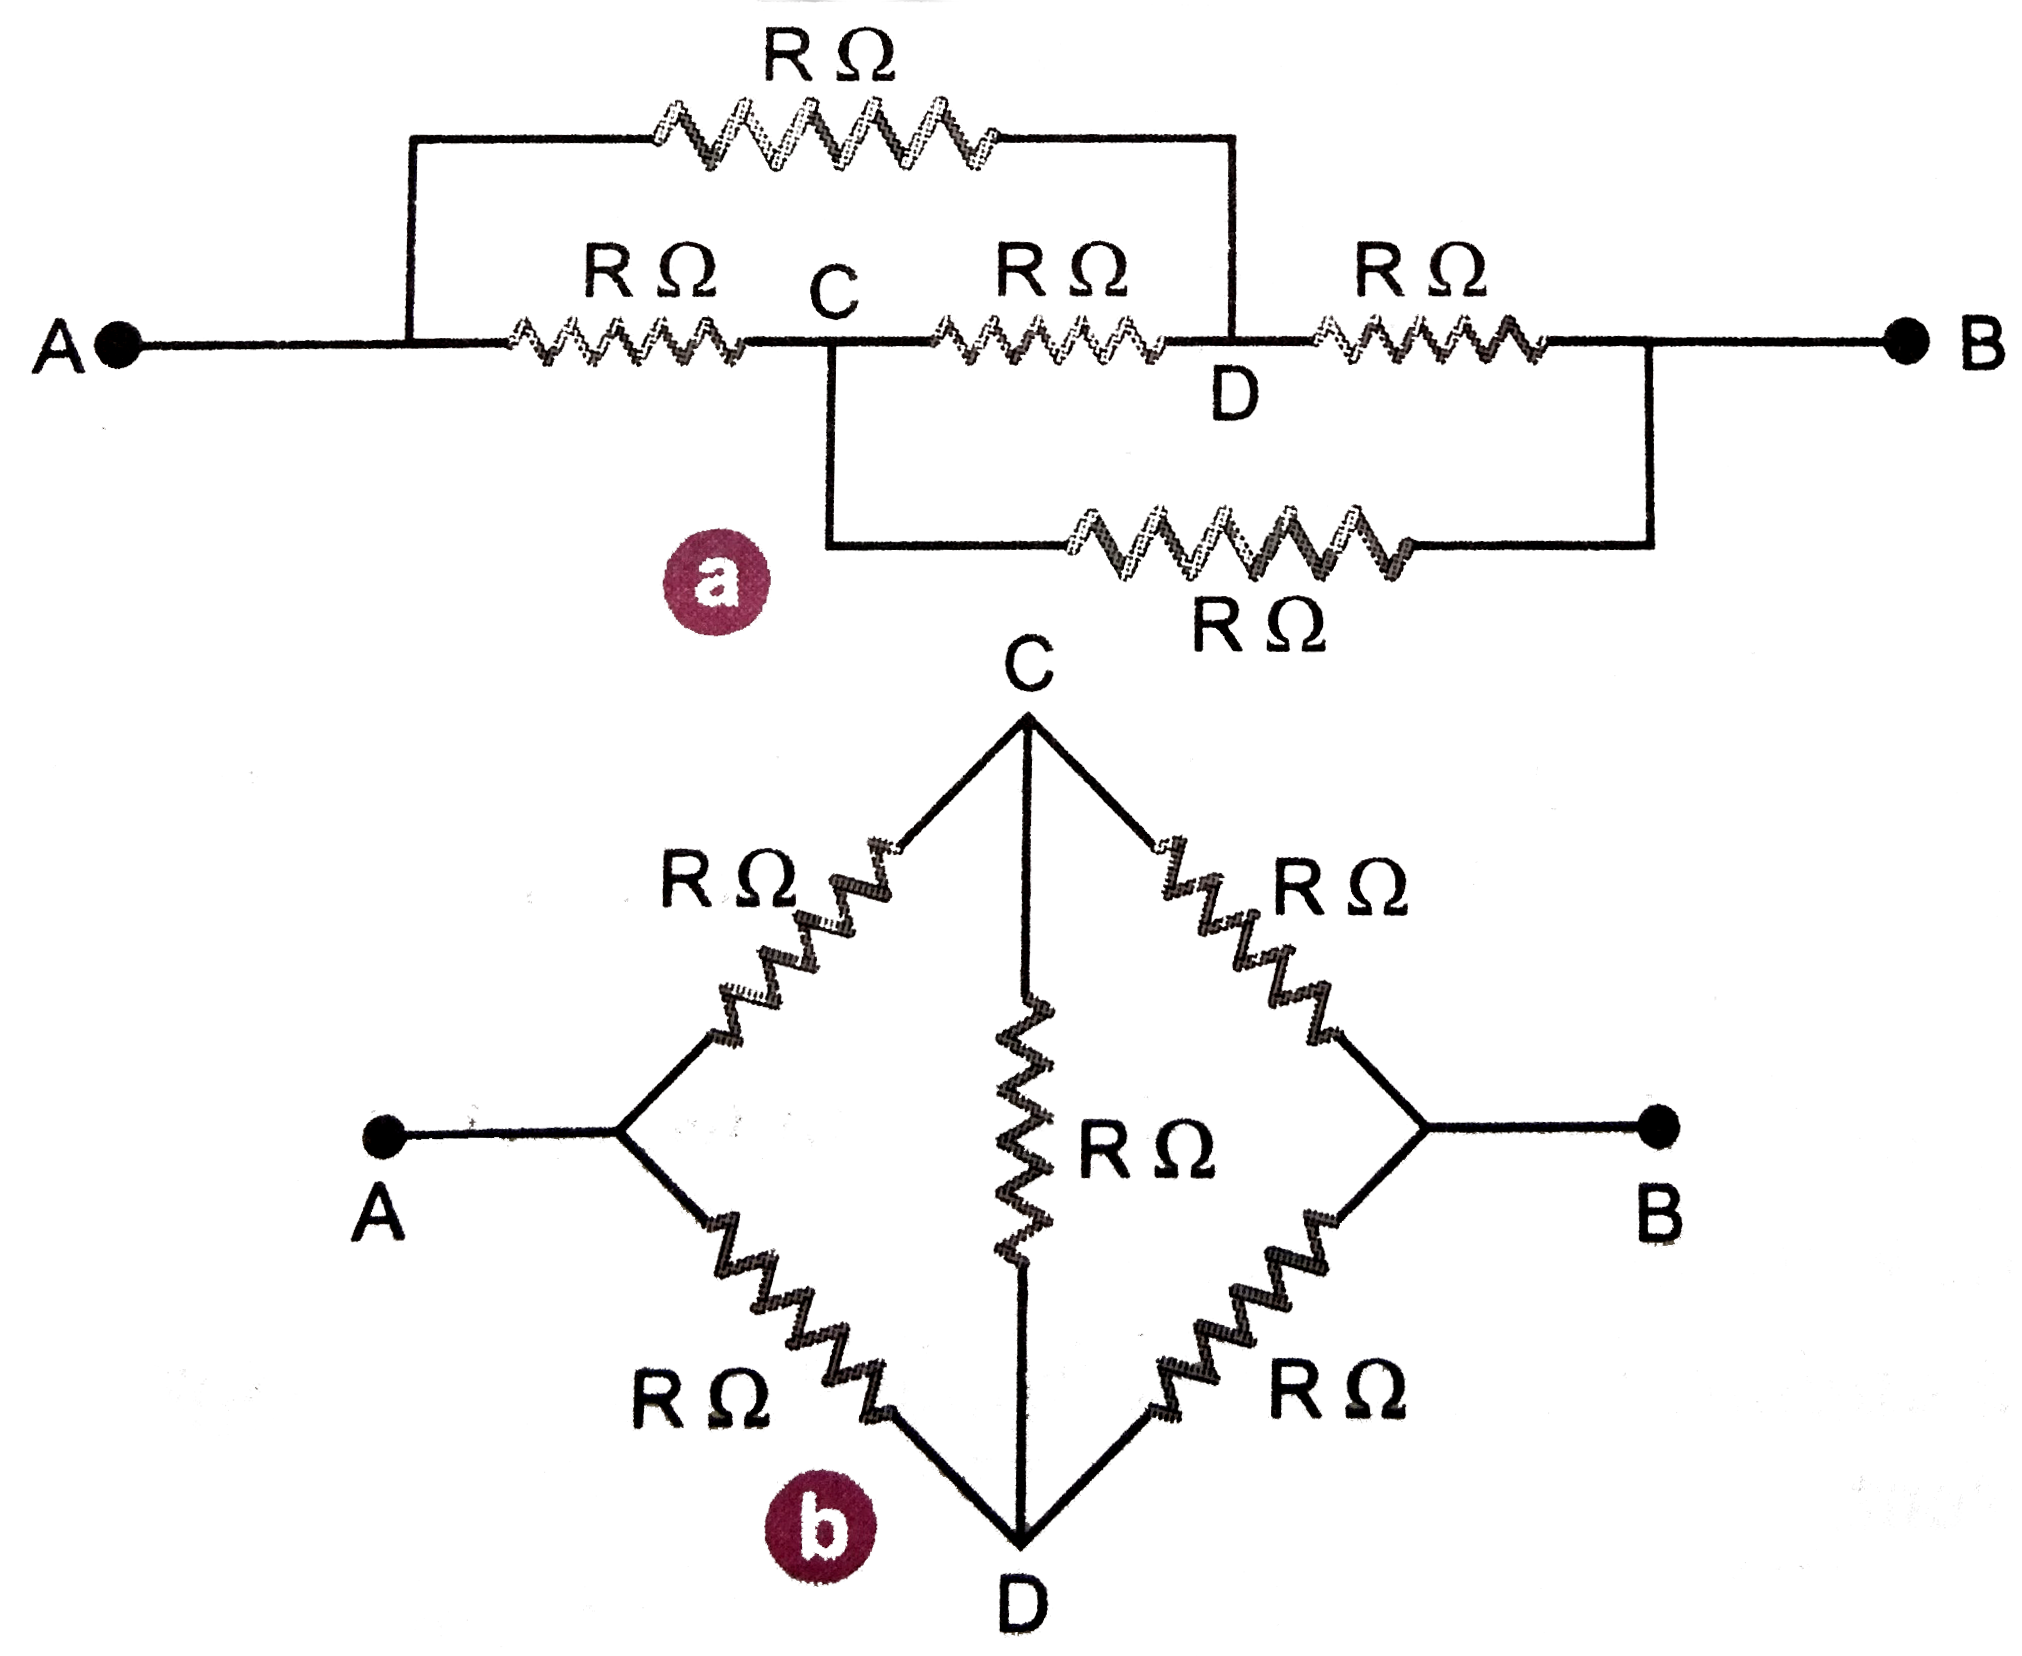 Five equal resistors each of R Omega are connected in a network. Calculate the equivalent resistance between the points A and B.